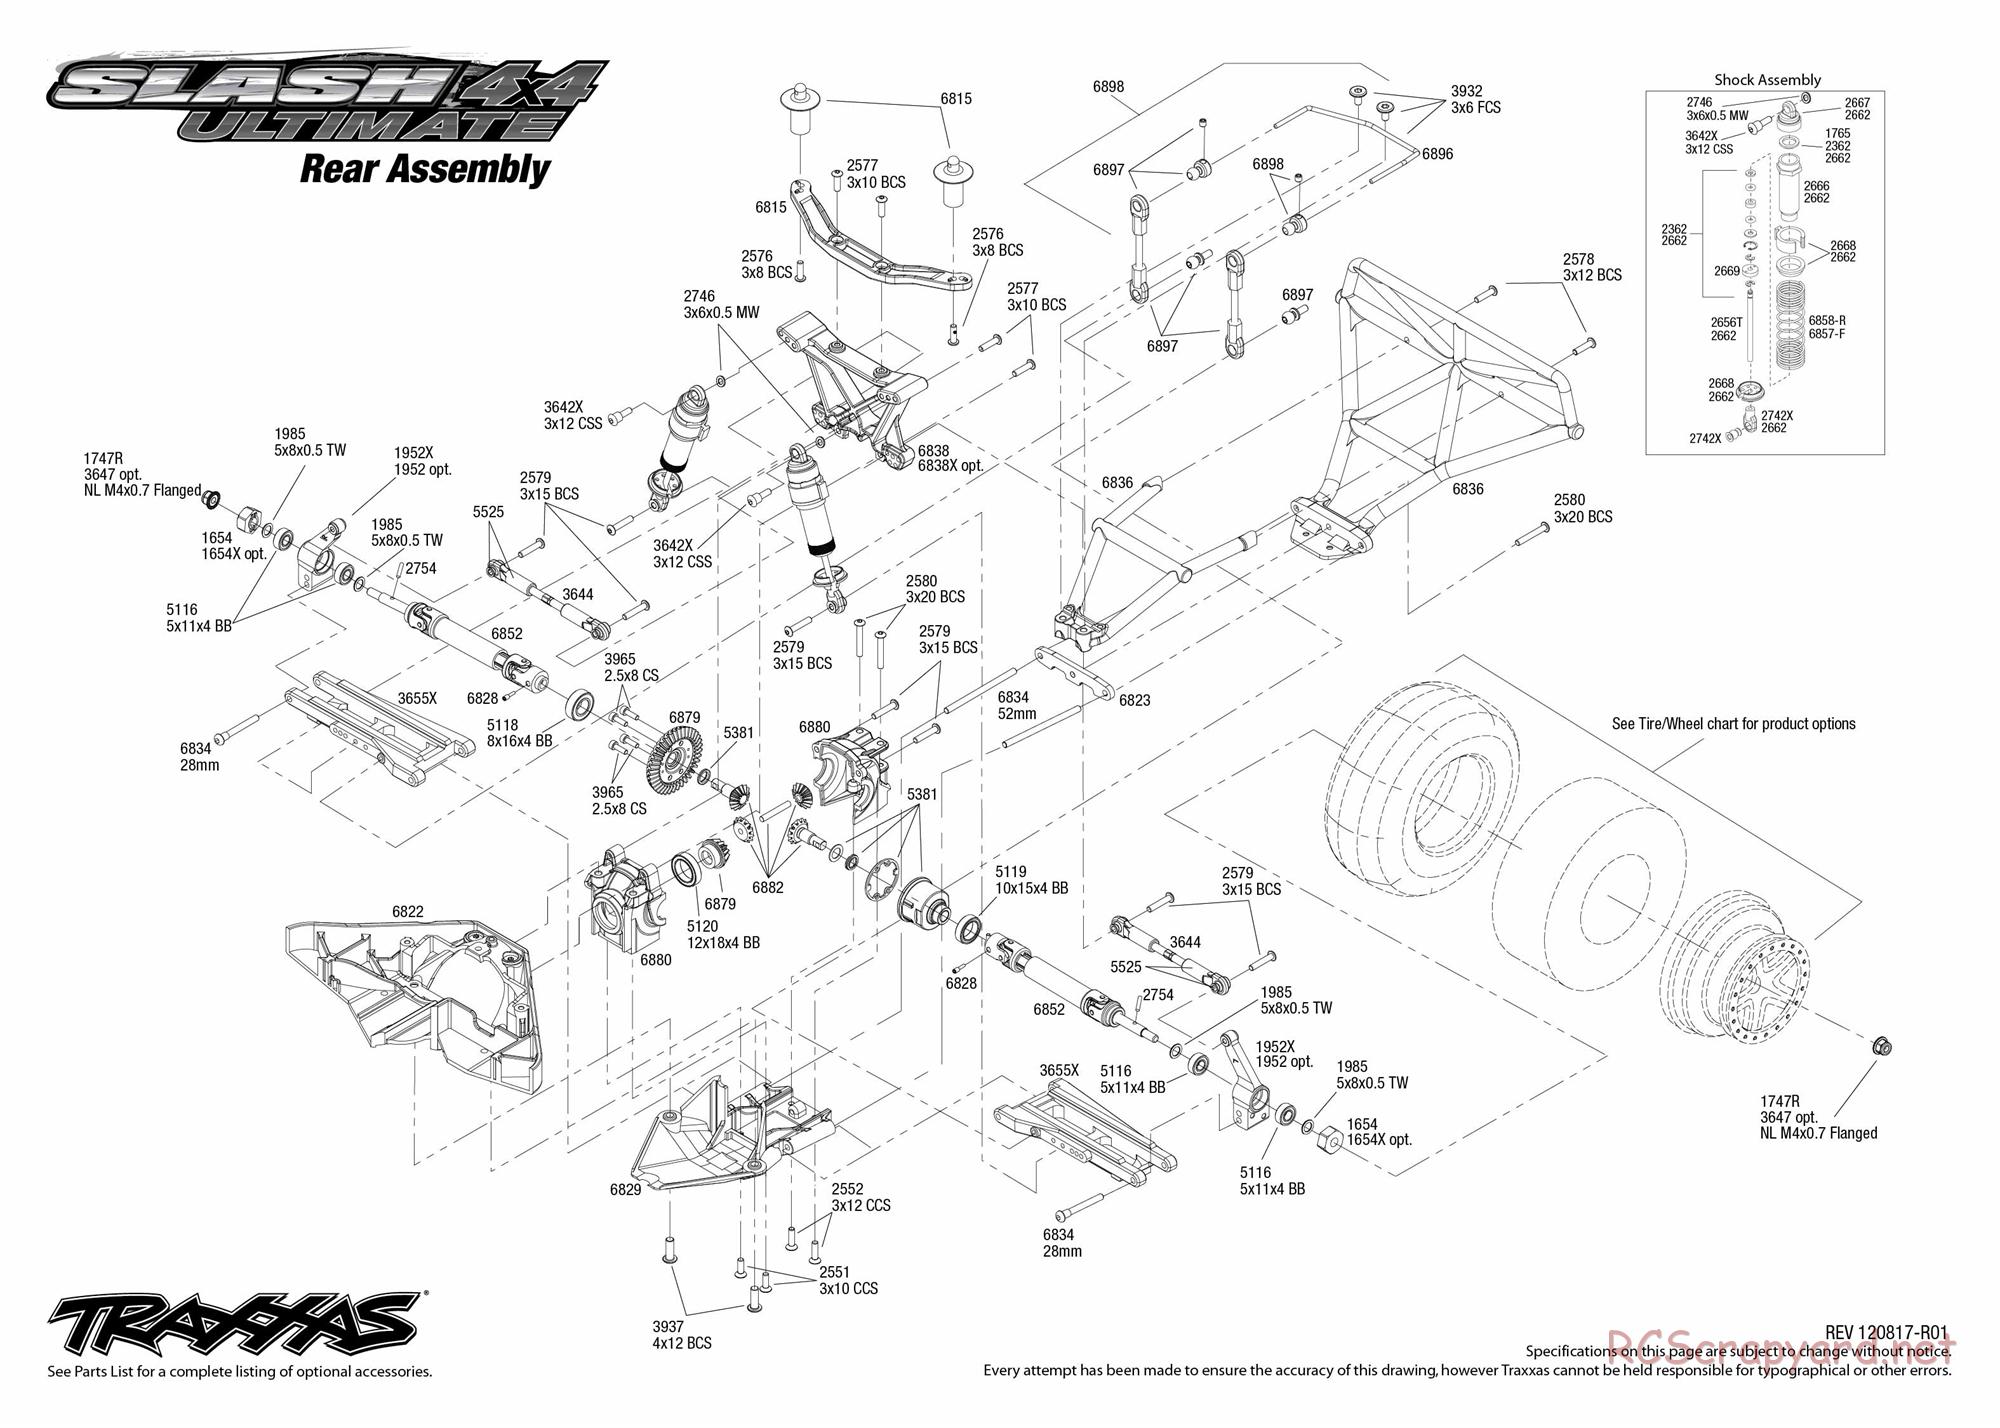 Traxxas - Slash 4x4 Ultimate - Exploded Views - Page 5